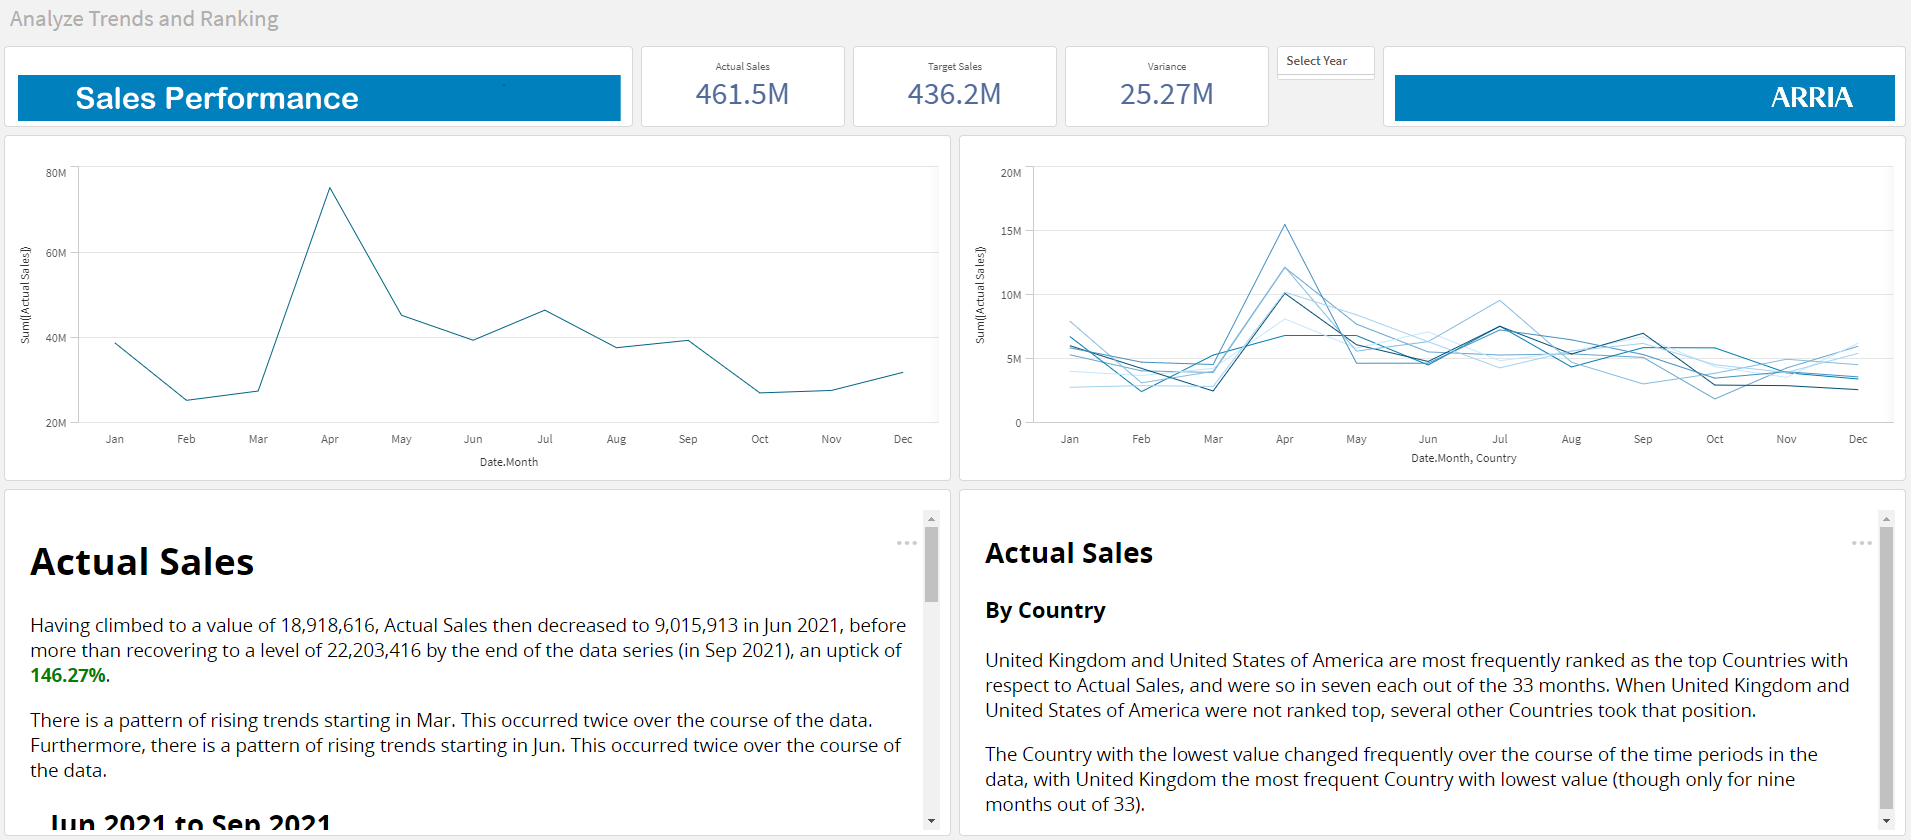 qlik-arria-showcase-analyze-trends-and-ranking.png